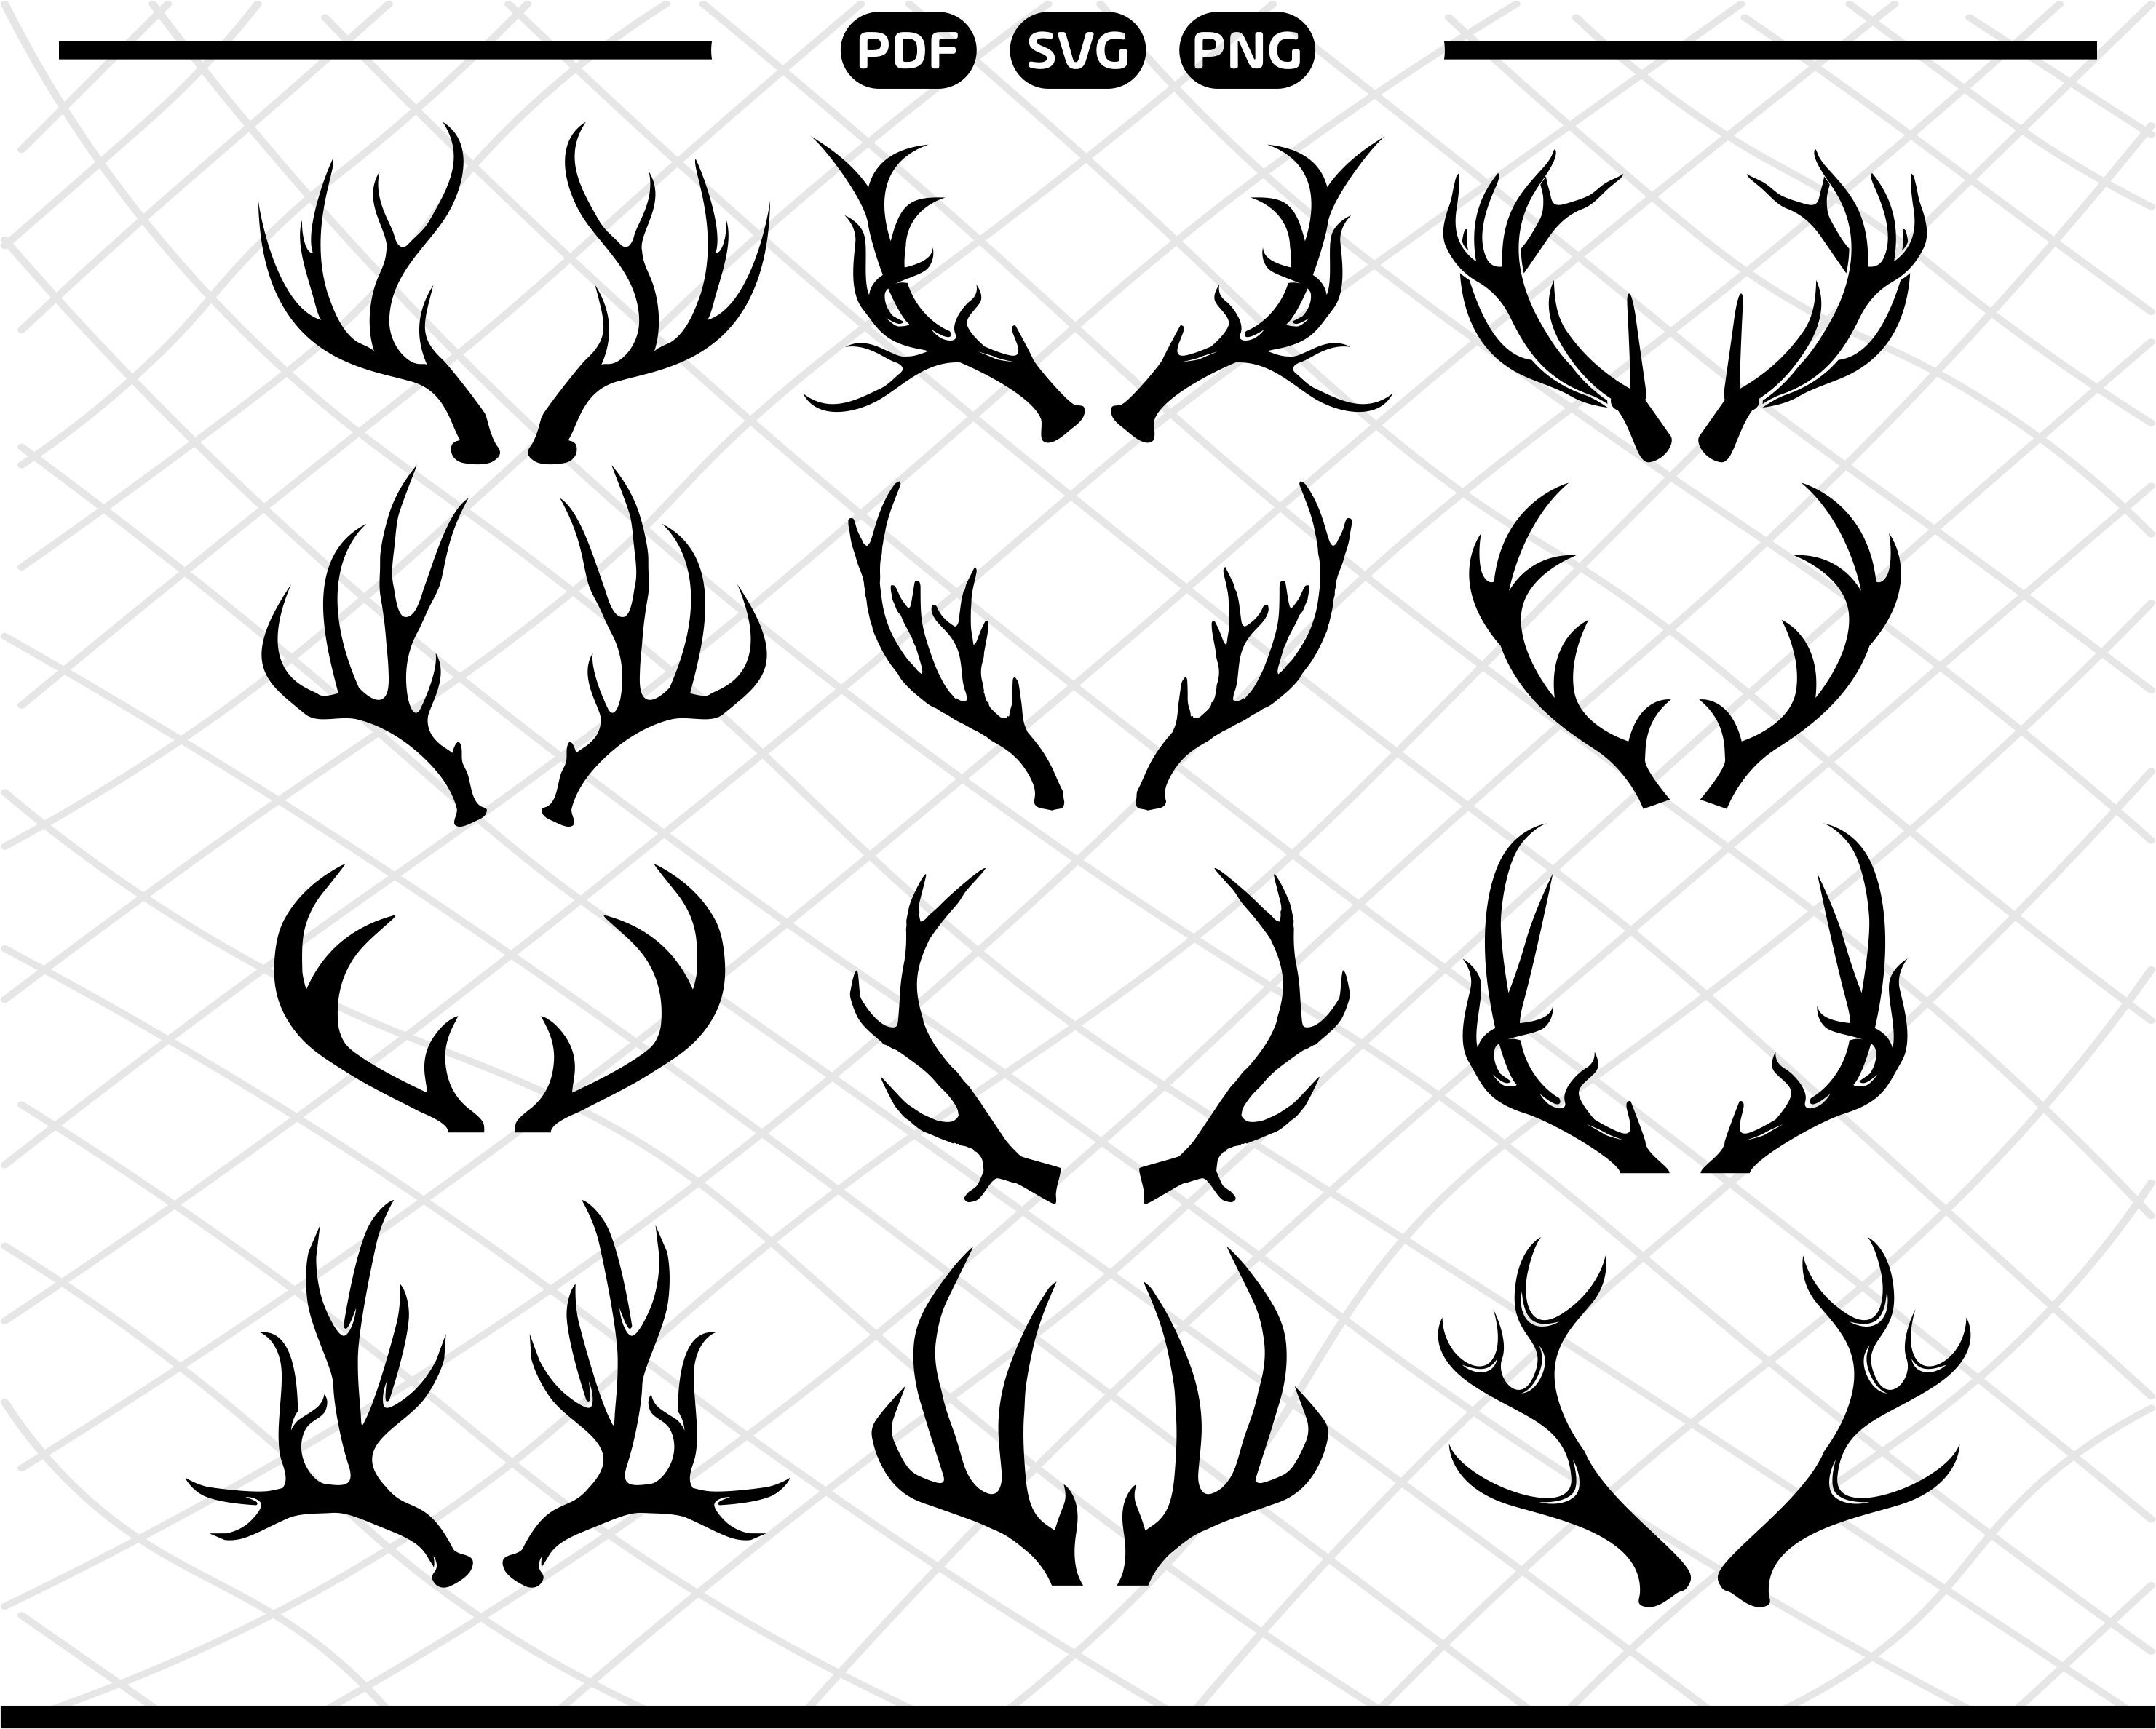 61,757 Antler Silhouette Images, Stock Photos, 3D objects, & Vectors